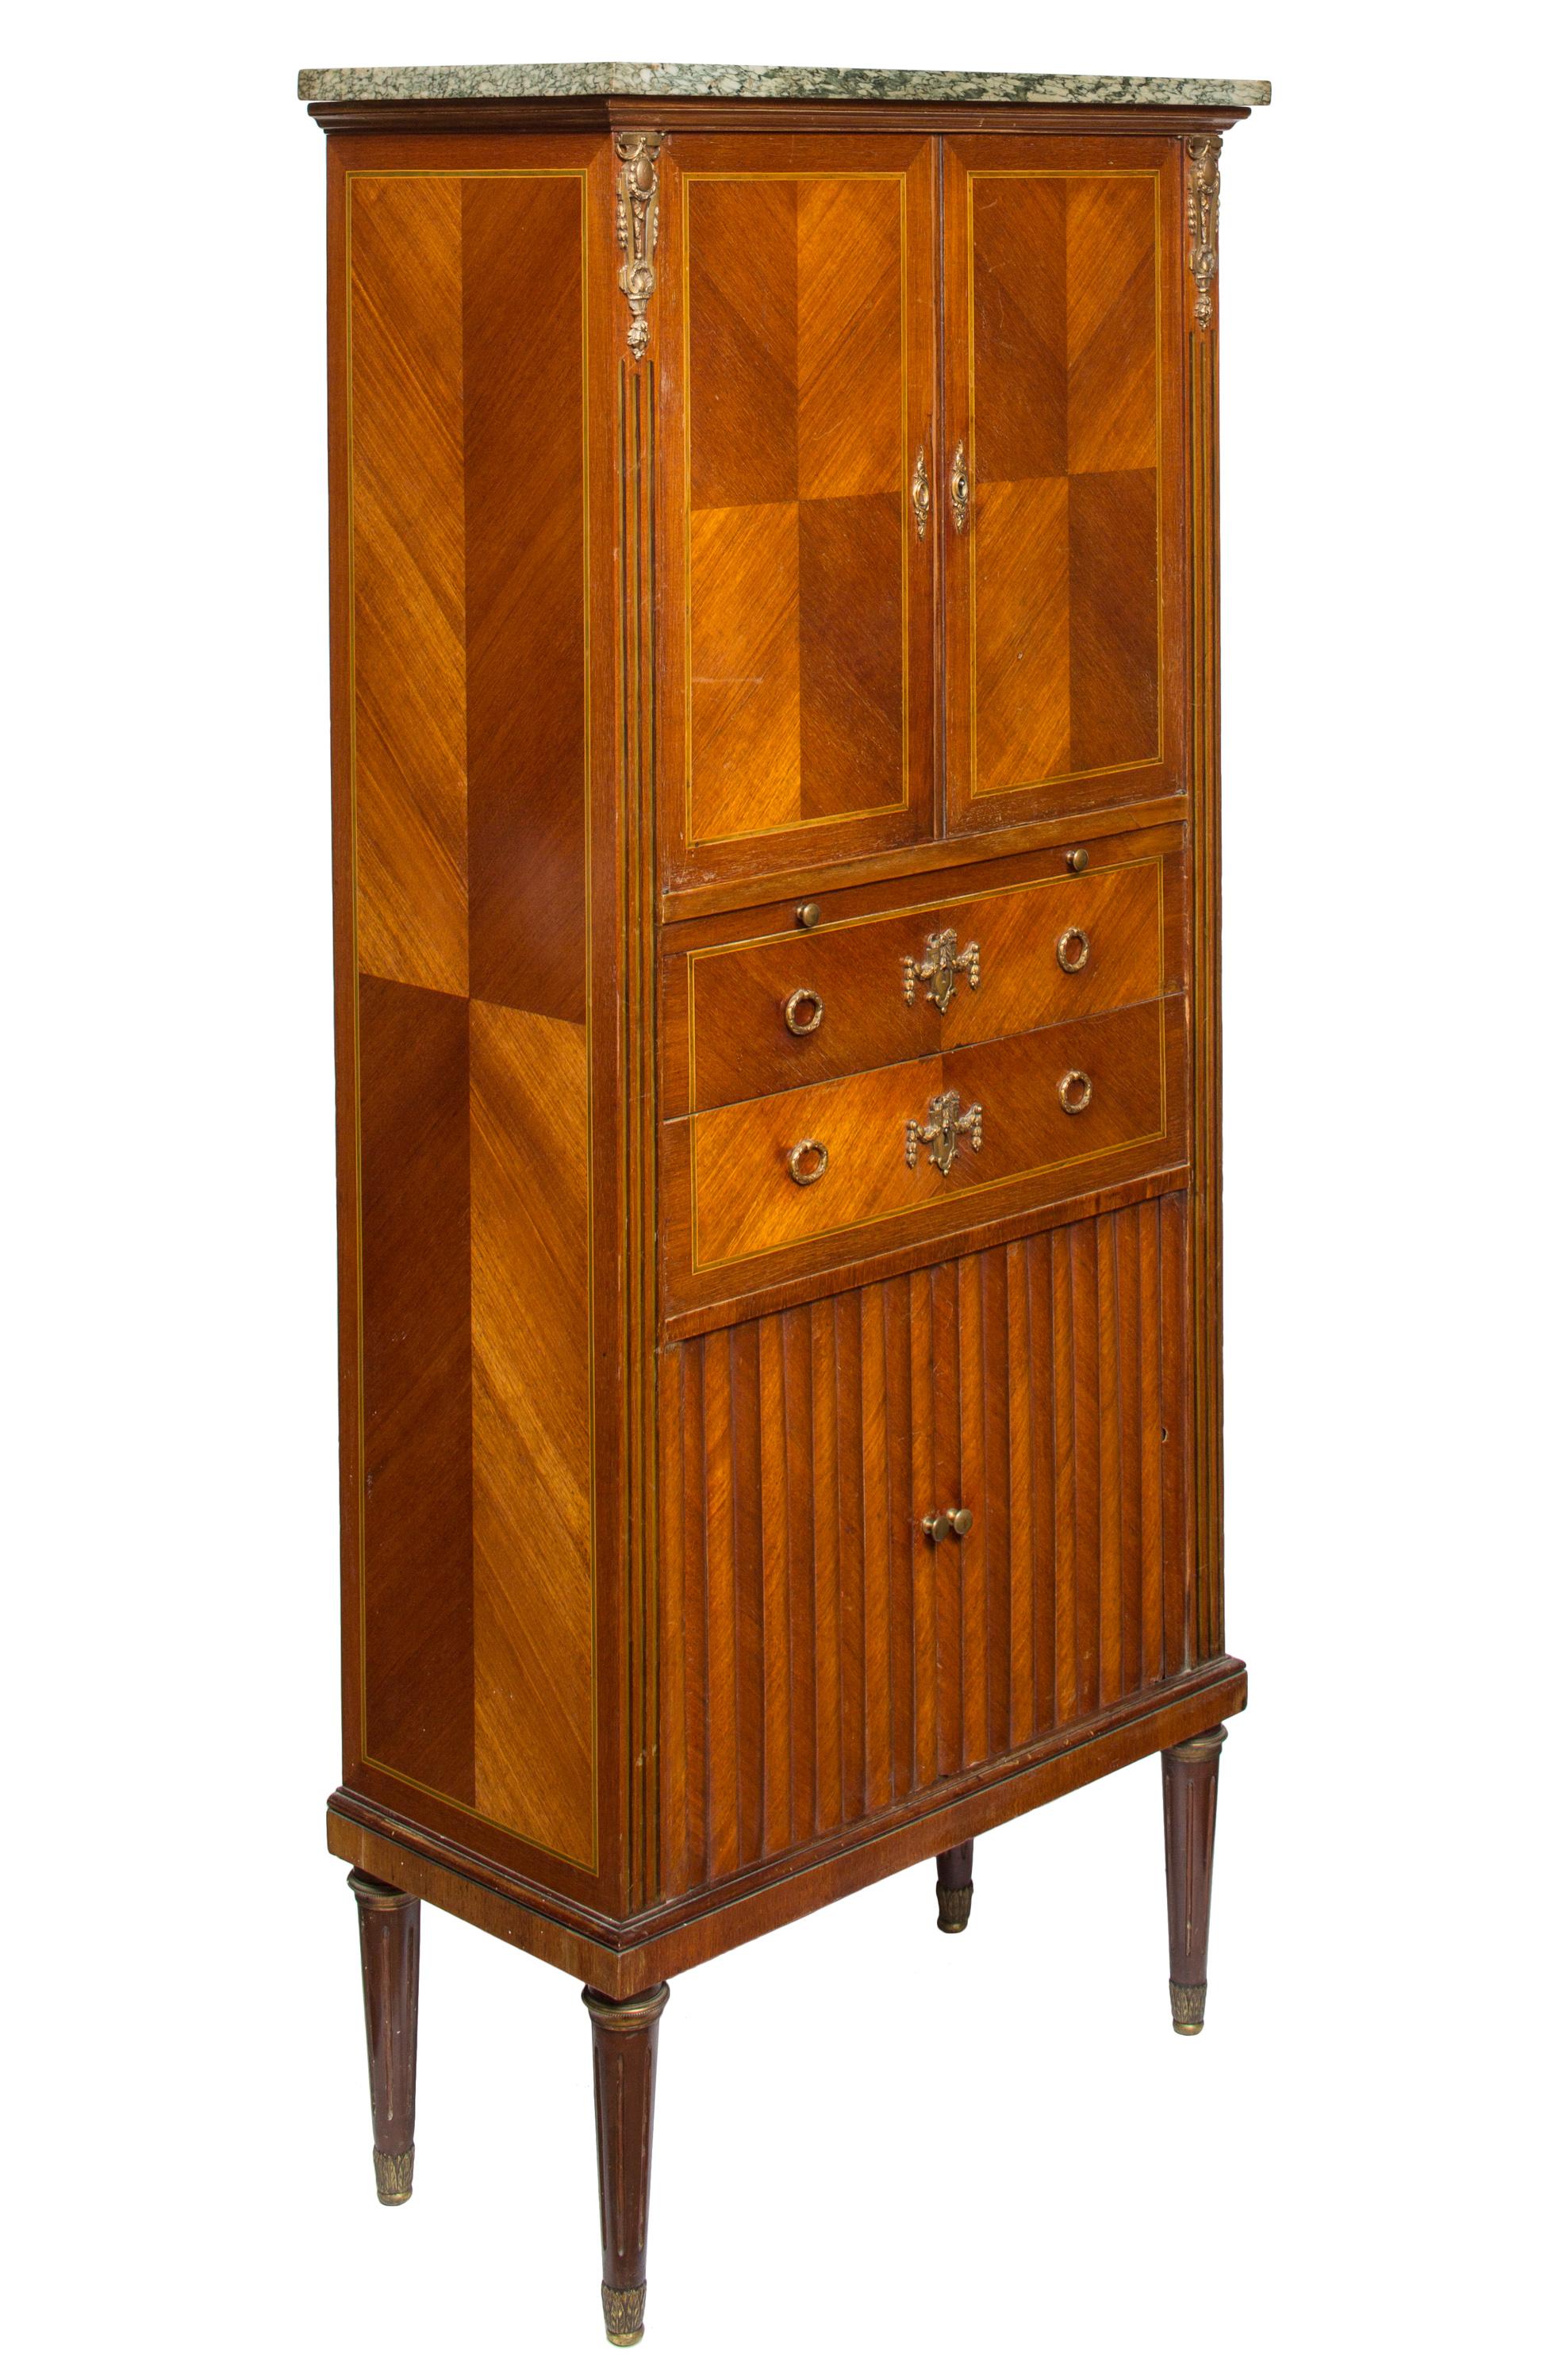 A 19th century, French secrétaire with beautiful feathered woodwork, eucalyptus fillet inlay with Louis XVI style detailing. The wood grain veneer is artfully arranged in geometric patterns on both front and sides, and the sliding tambour doors add